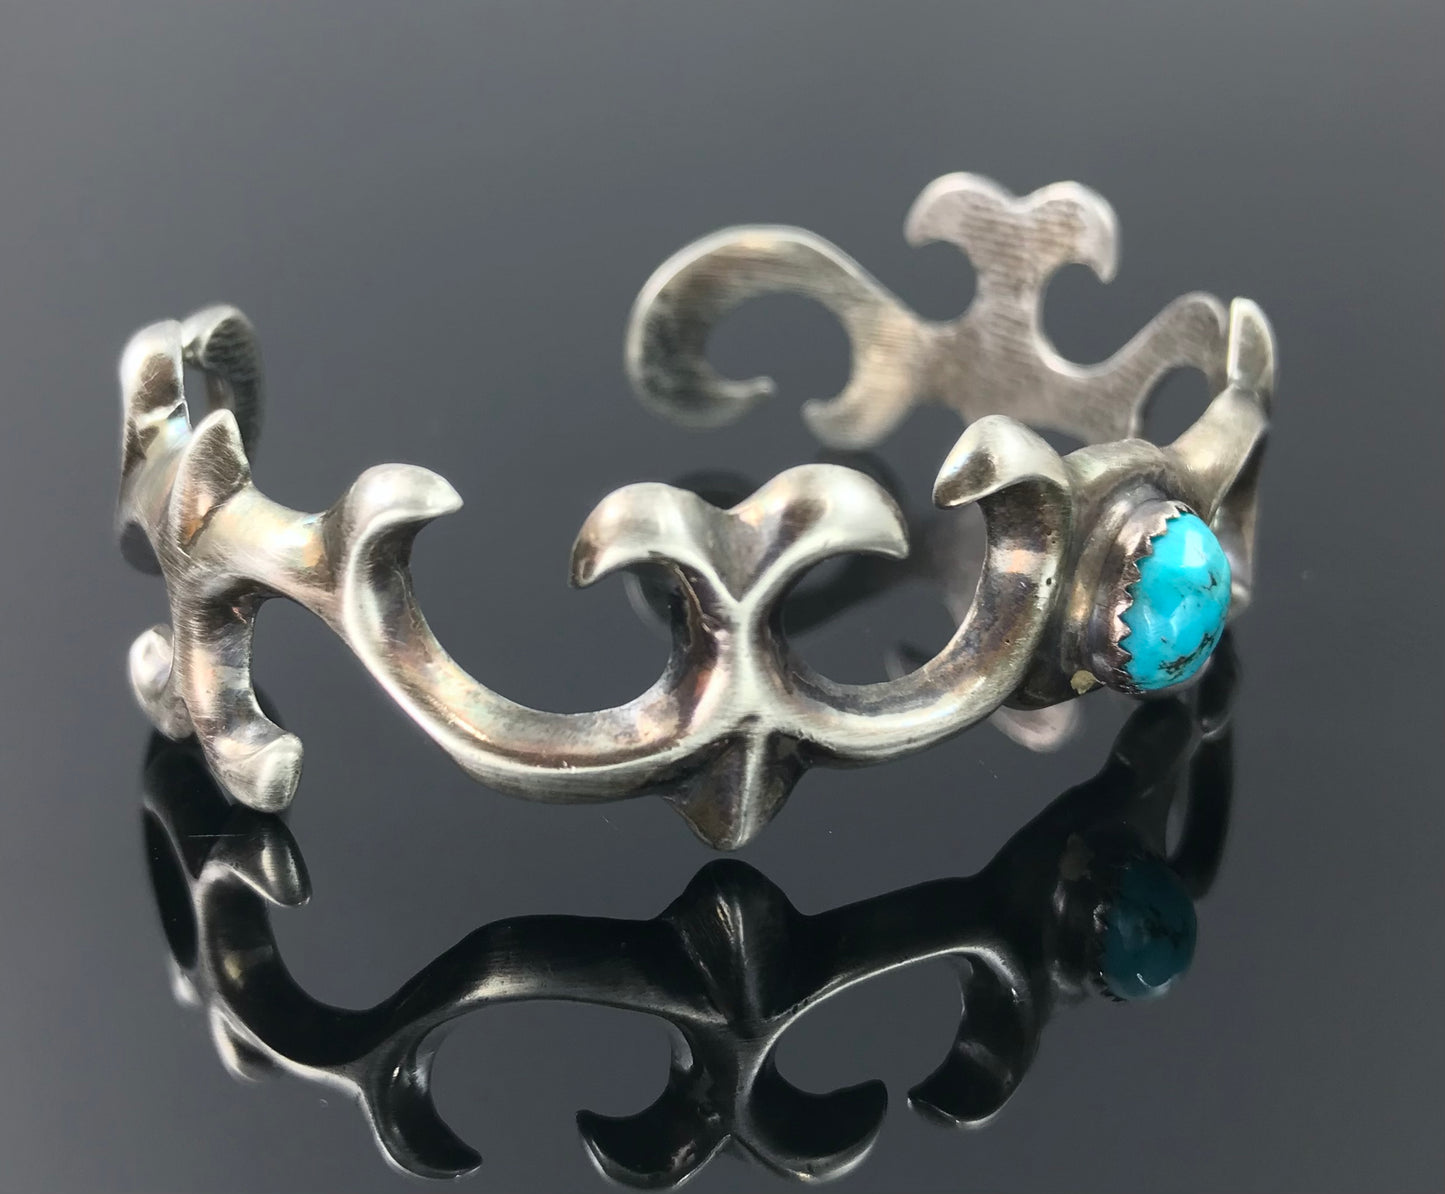 Sand Cast Turquoise Navajo Native American Cuff Bracelet Sterling Silver Signed - Francis Begay